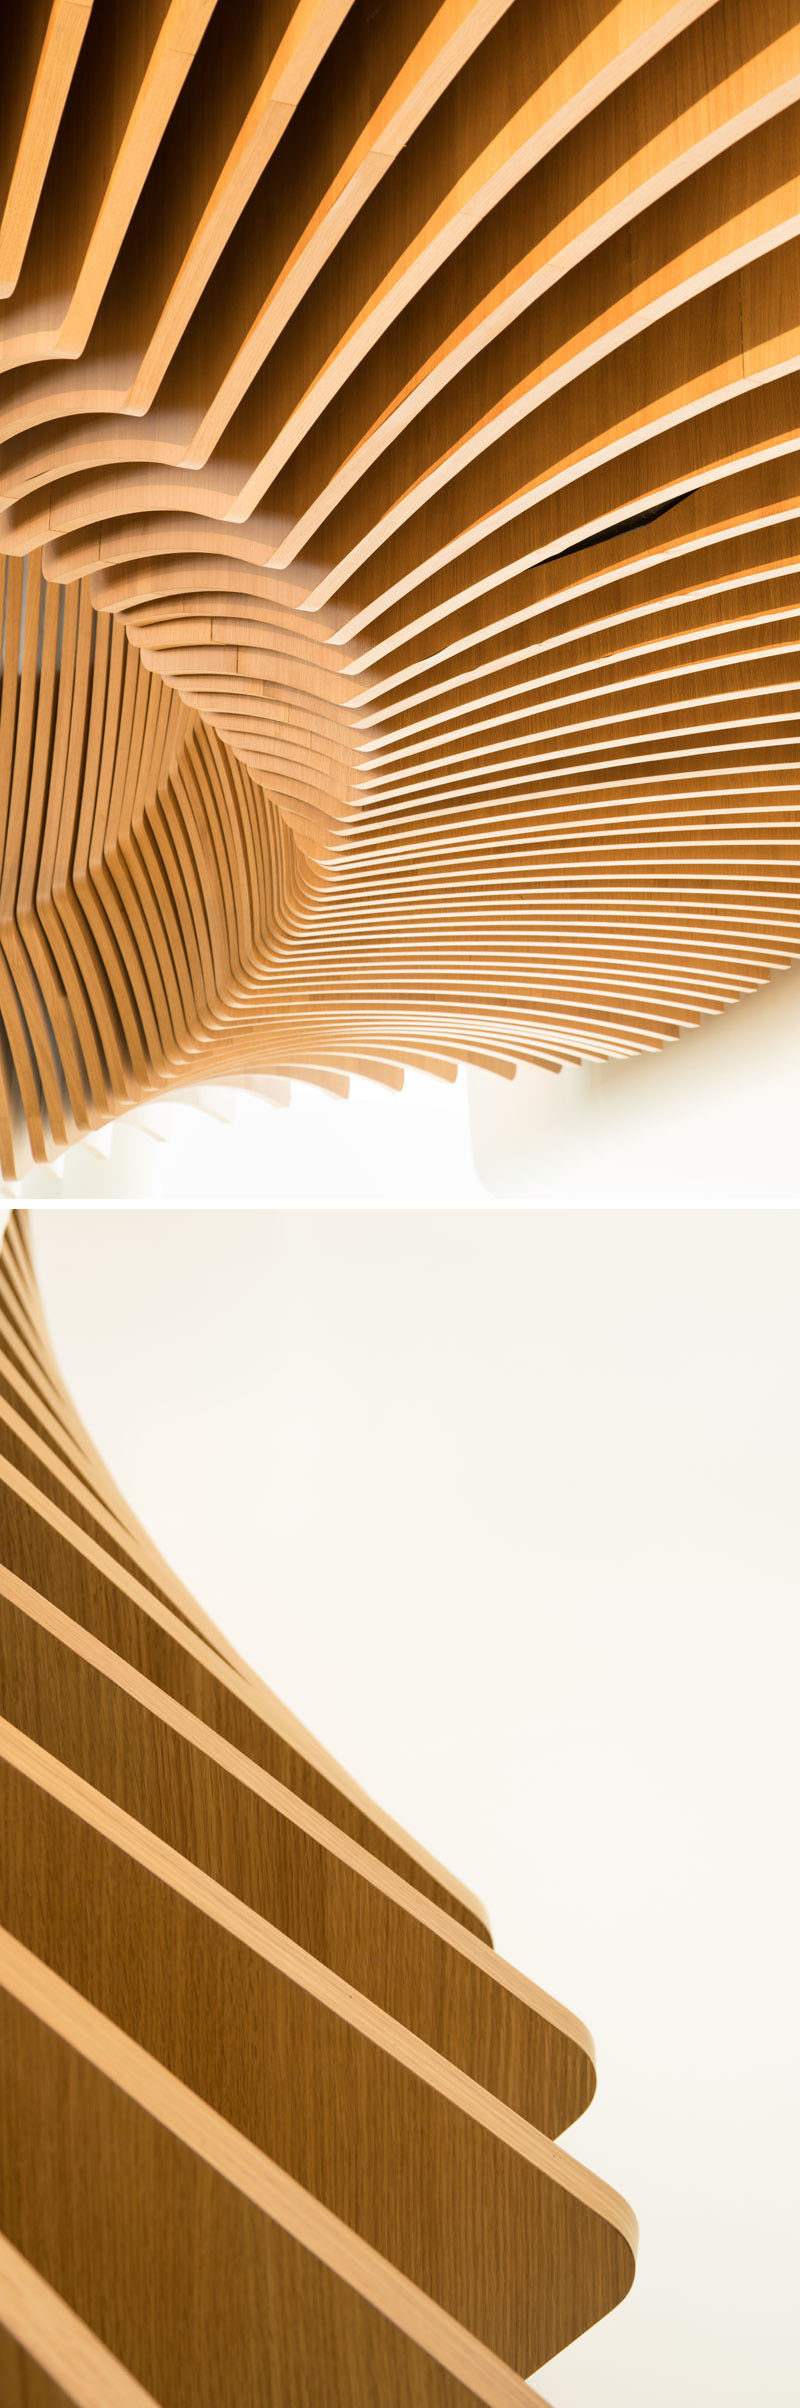 This large, sculptural, snake-like, wood staircase was installed in a new office building in France to connect the four floors of the building. #WoodStairs #SculpturalStairs #StairDesign #OfficeDesign #Stairs